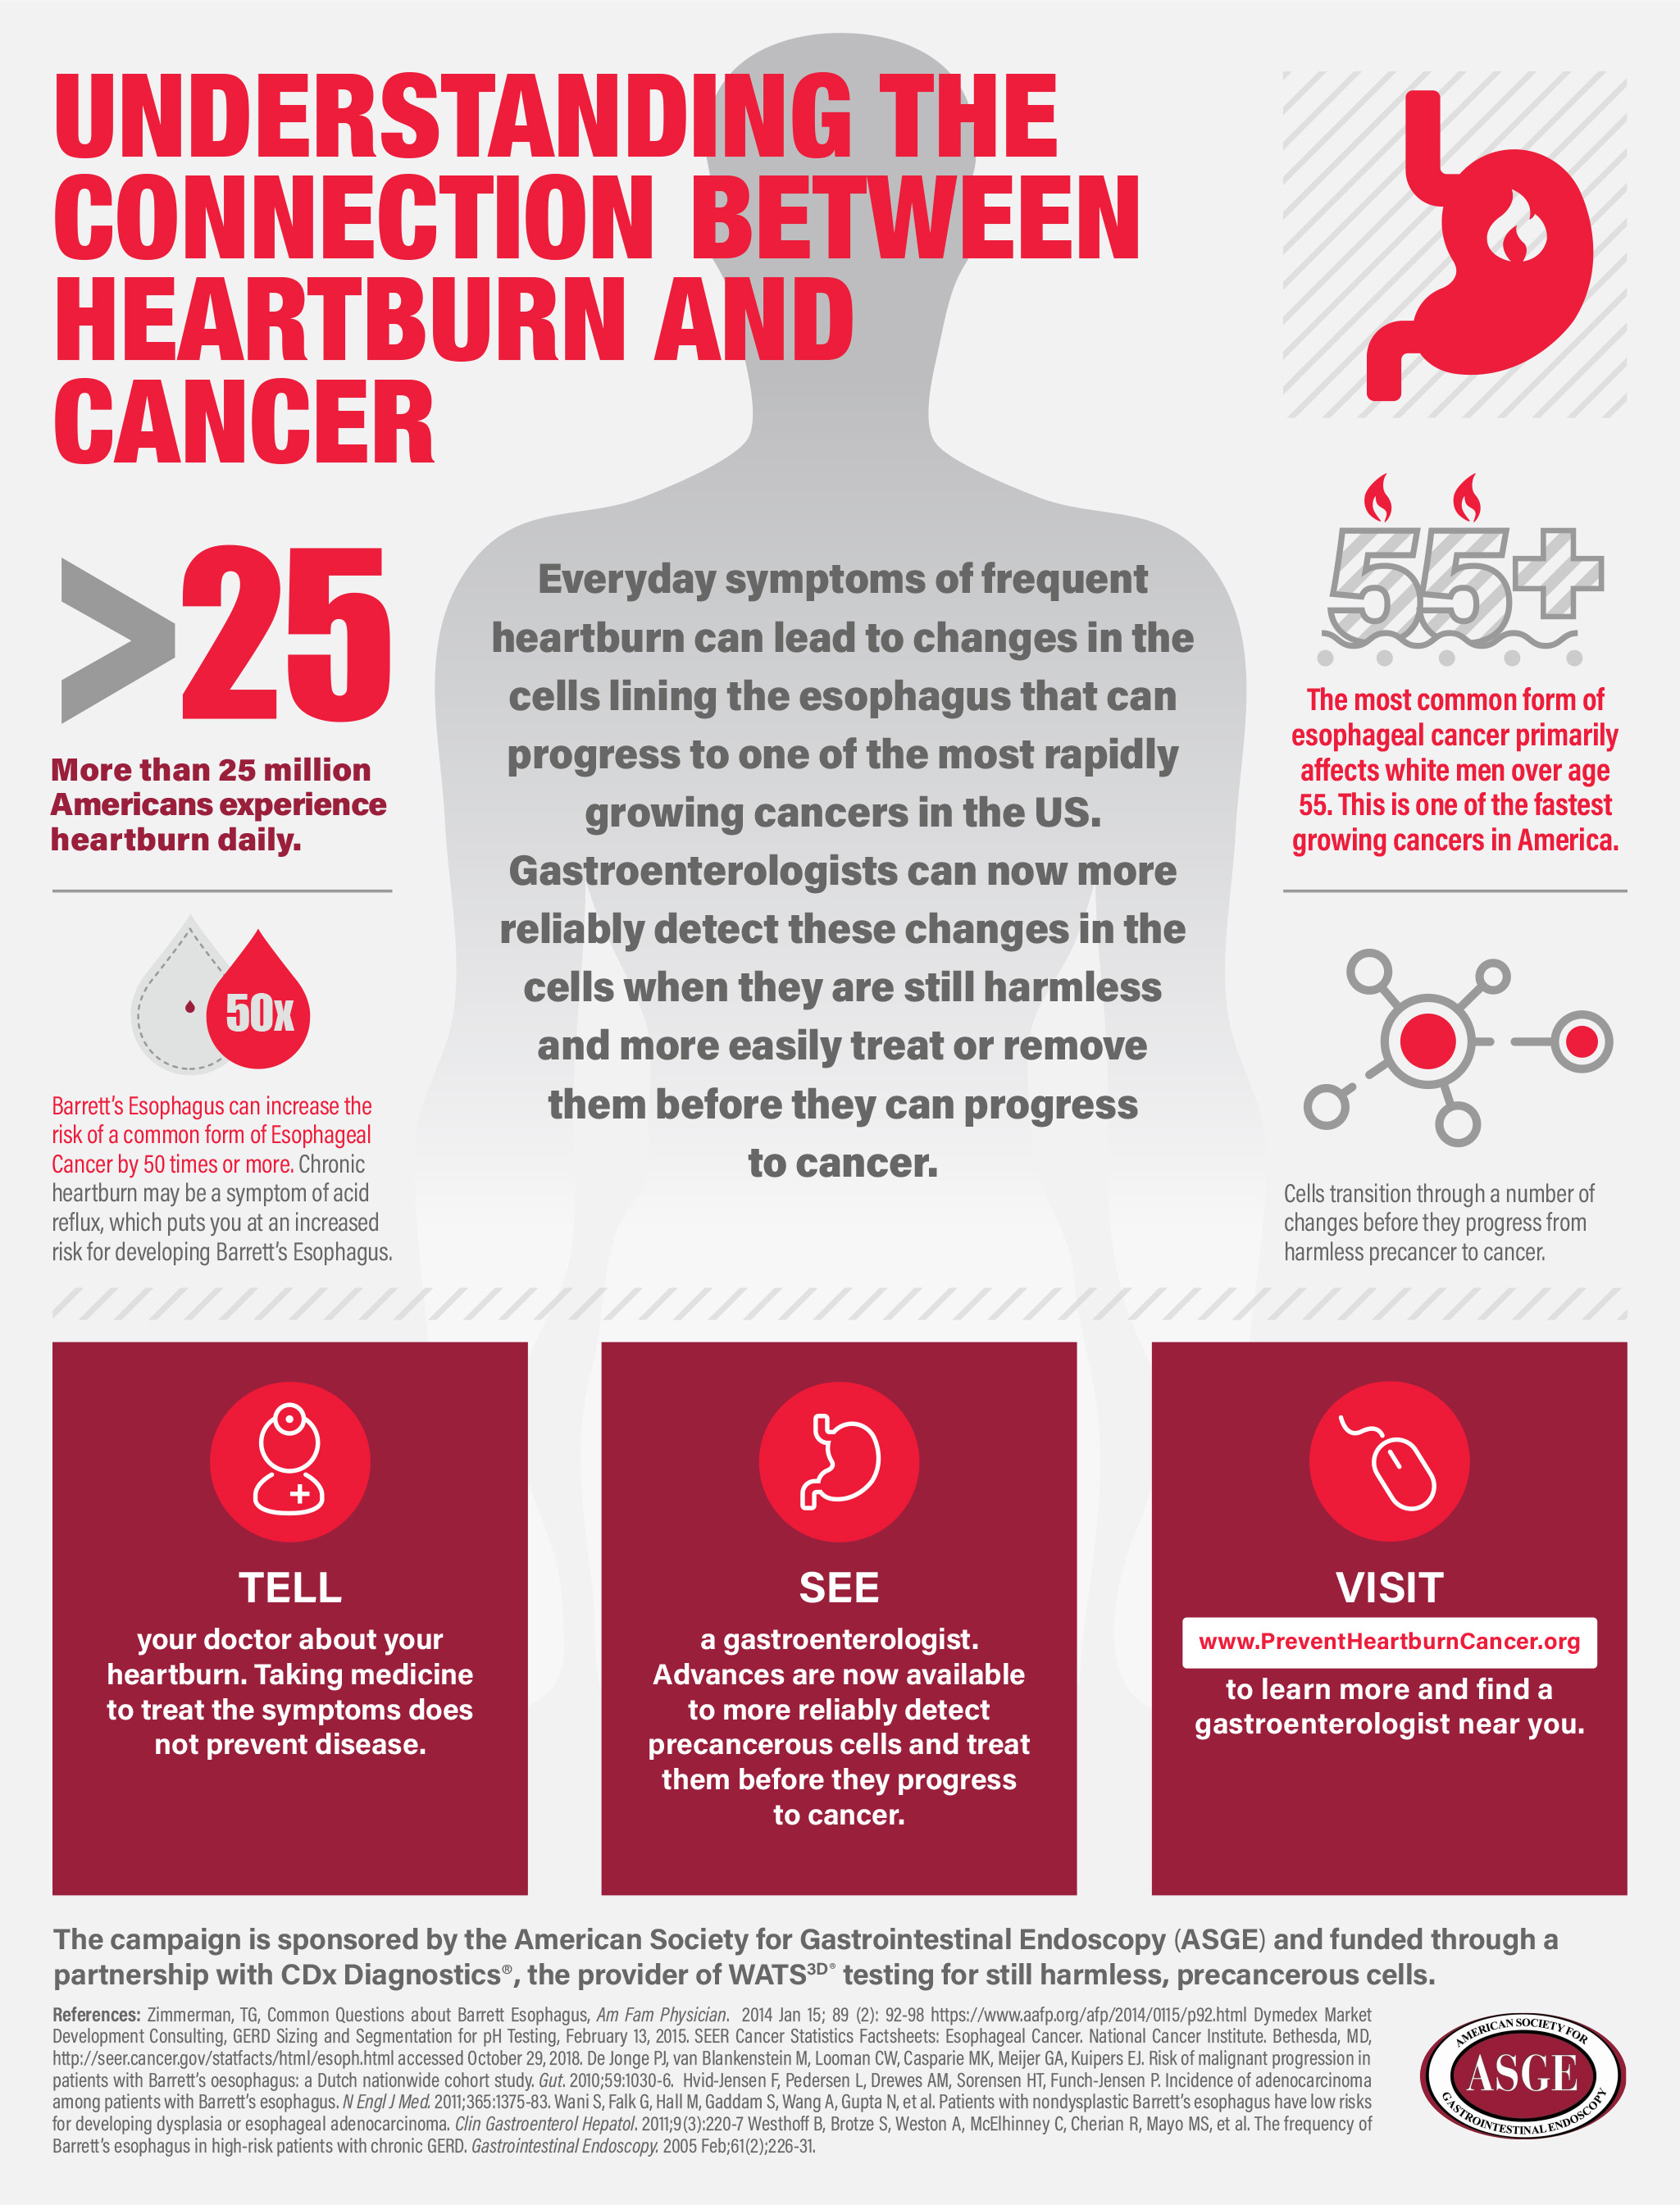 Understanding the Connection Between Heartburn and Cancer